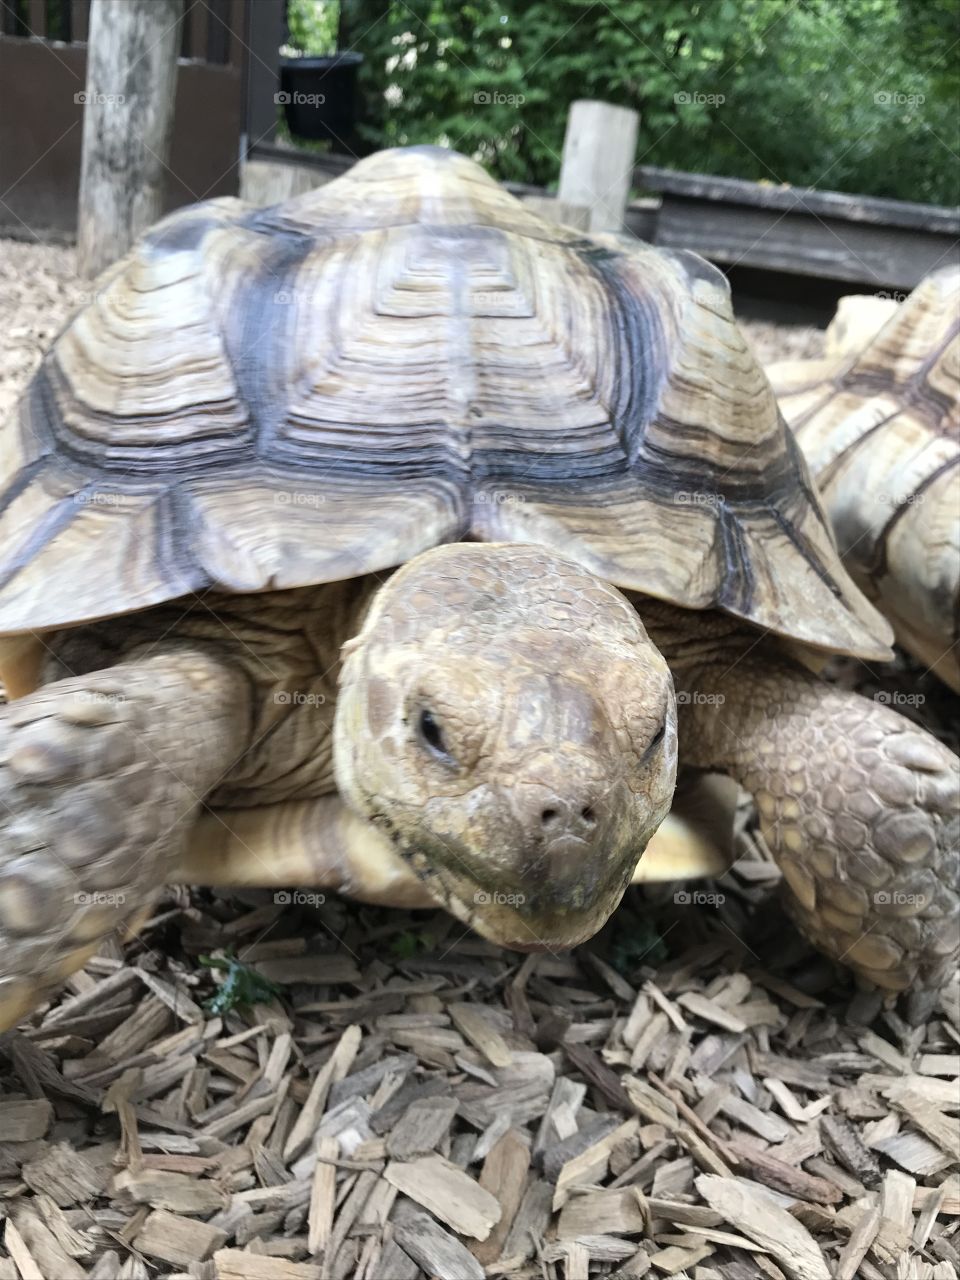 A tortoise on the move at the Nashville Zoo in the summertime 